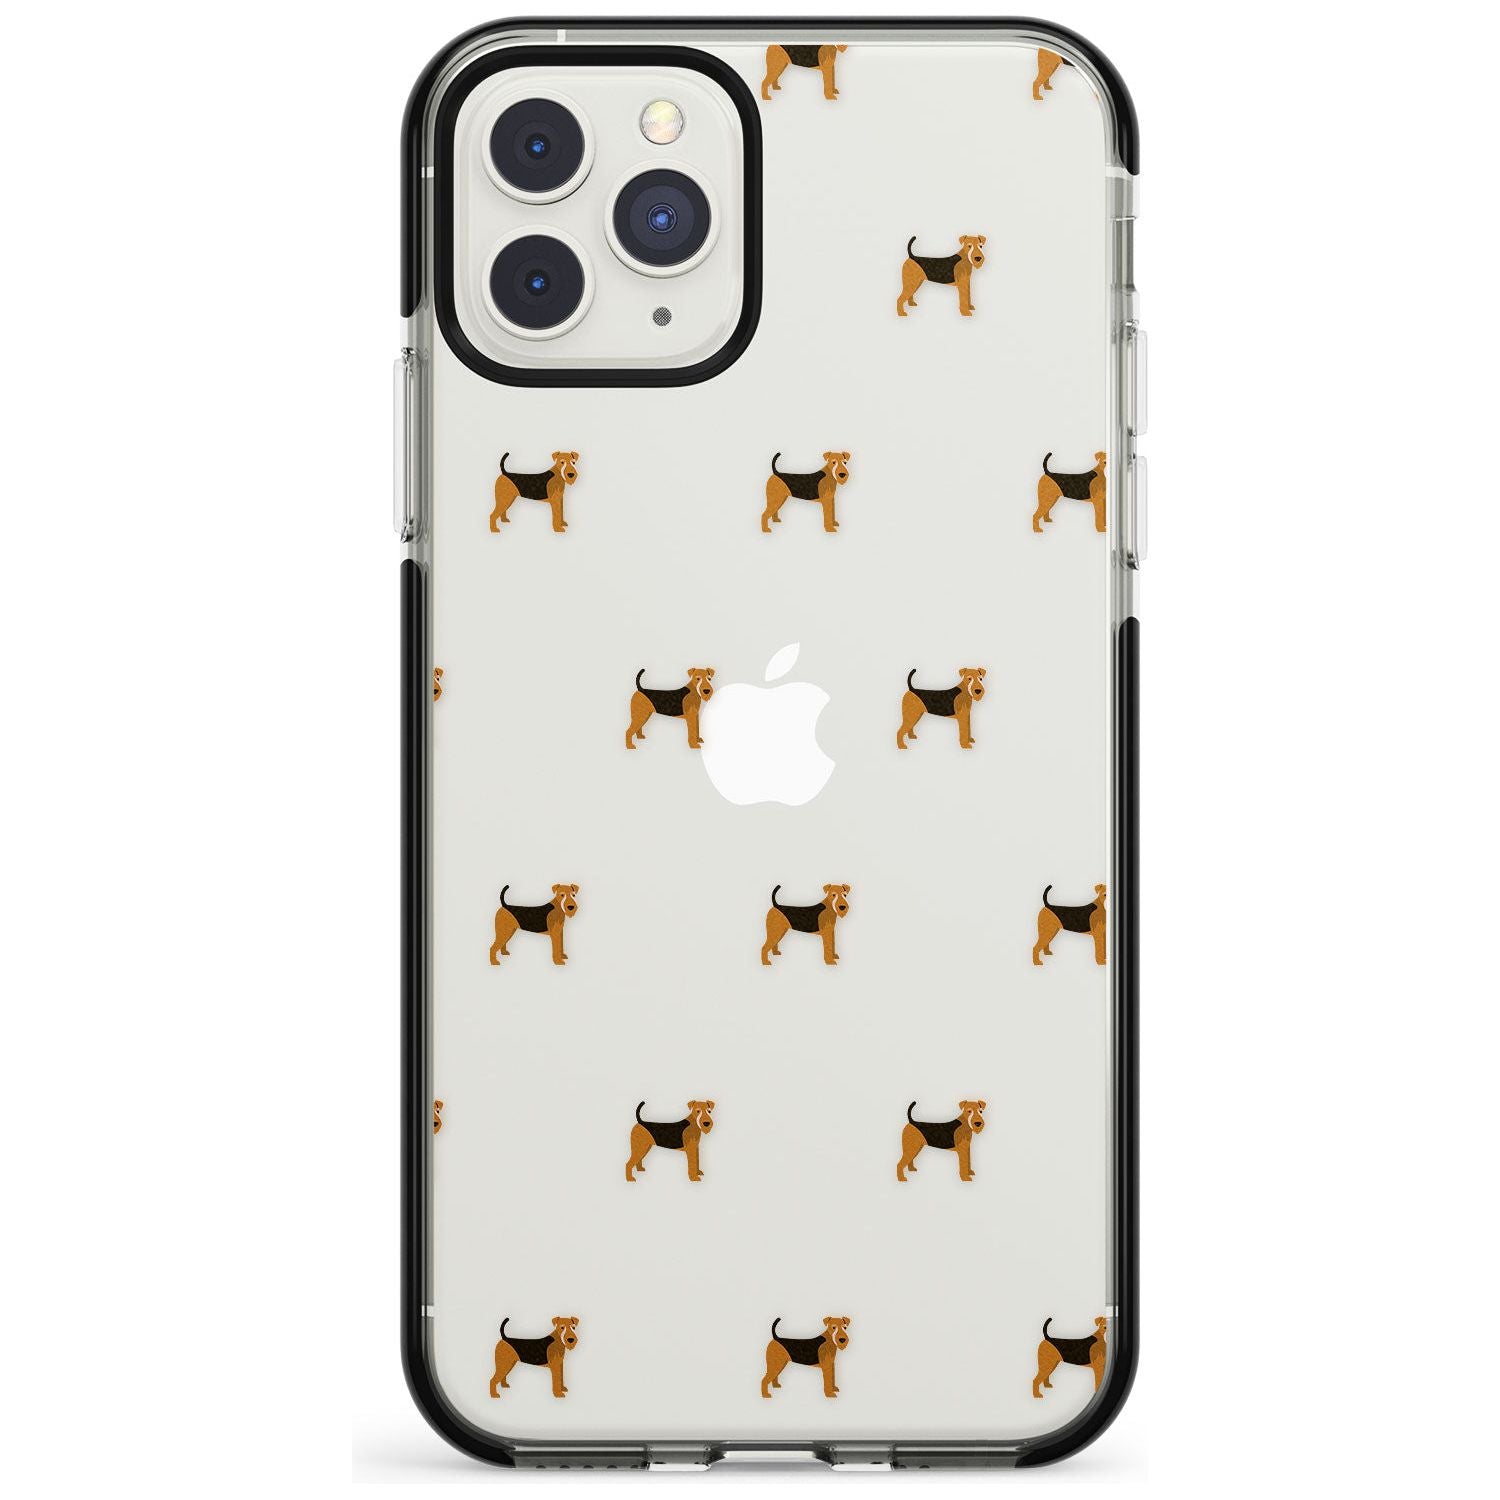 Airedale Terrier Dog Pattern Clear Black Impact Phone Case for iPhone 11 Pro Max